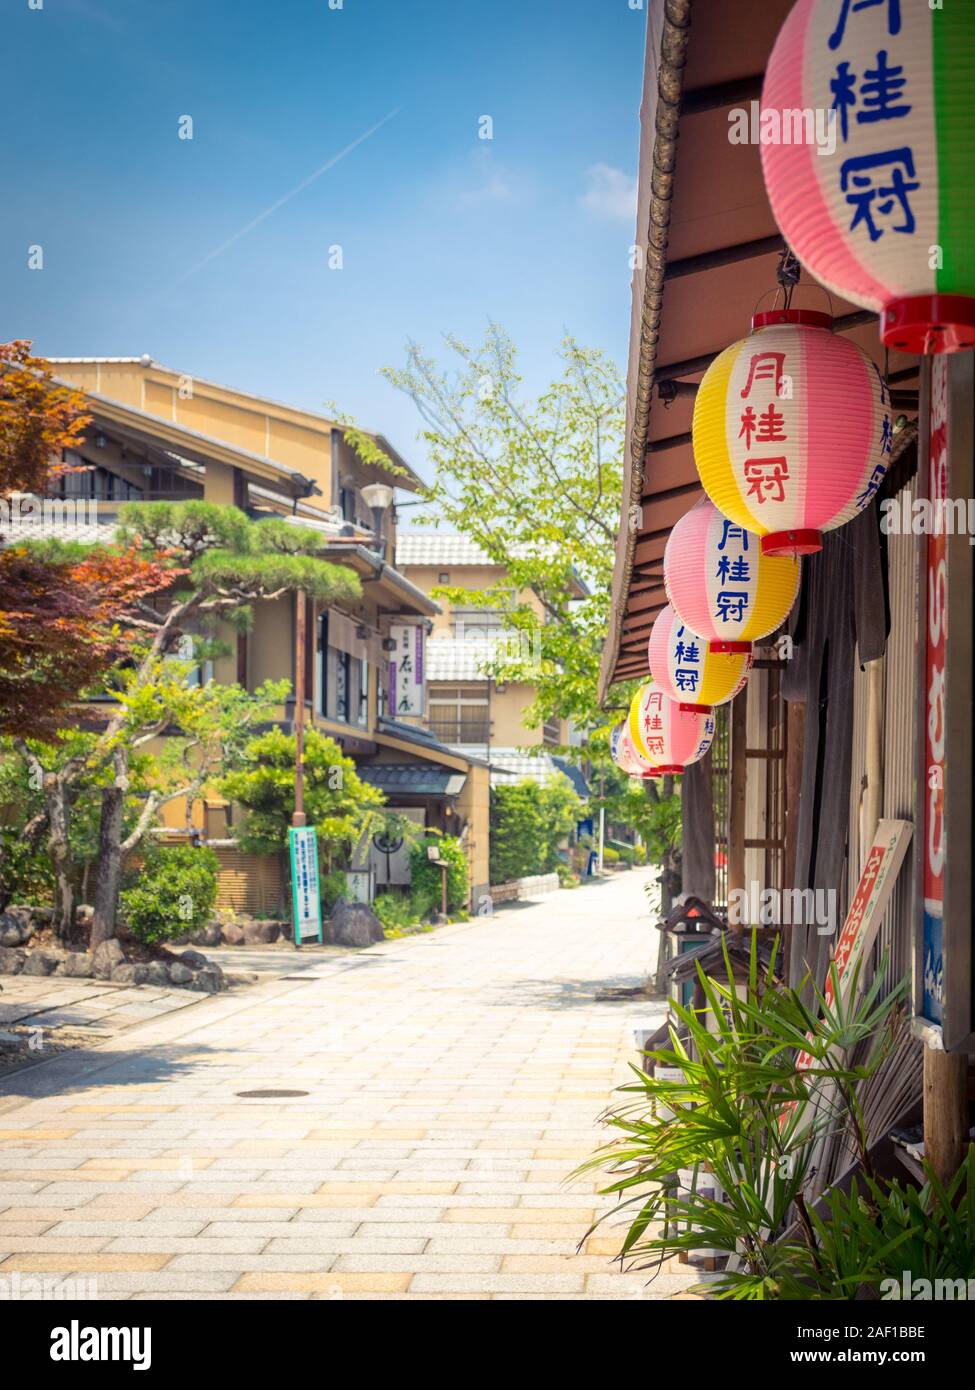 The exterior of Aiso, a popular restaurant and inn on Ajirogi-no-michi Street and the Uji River in Uji, Japan. Stock Photo